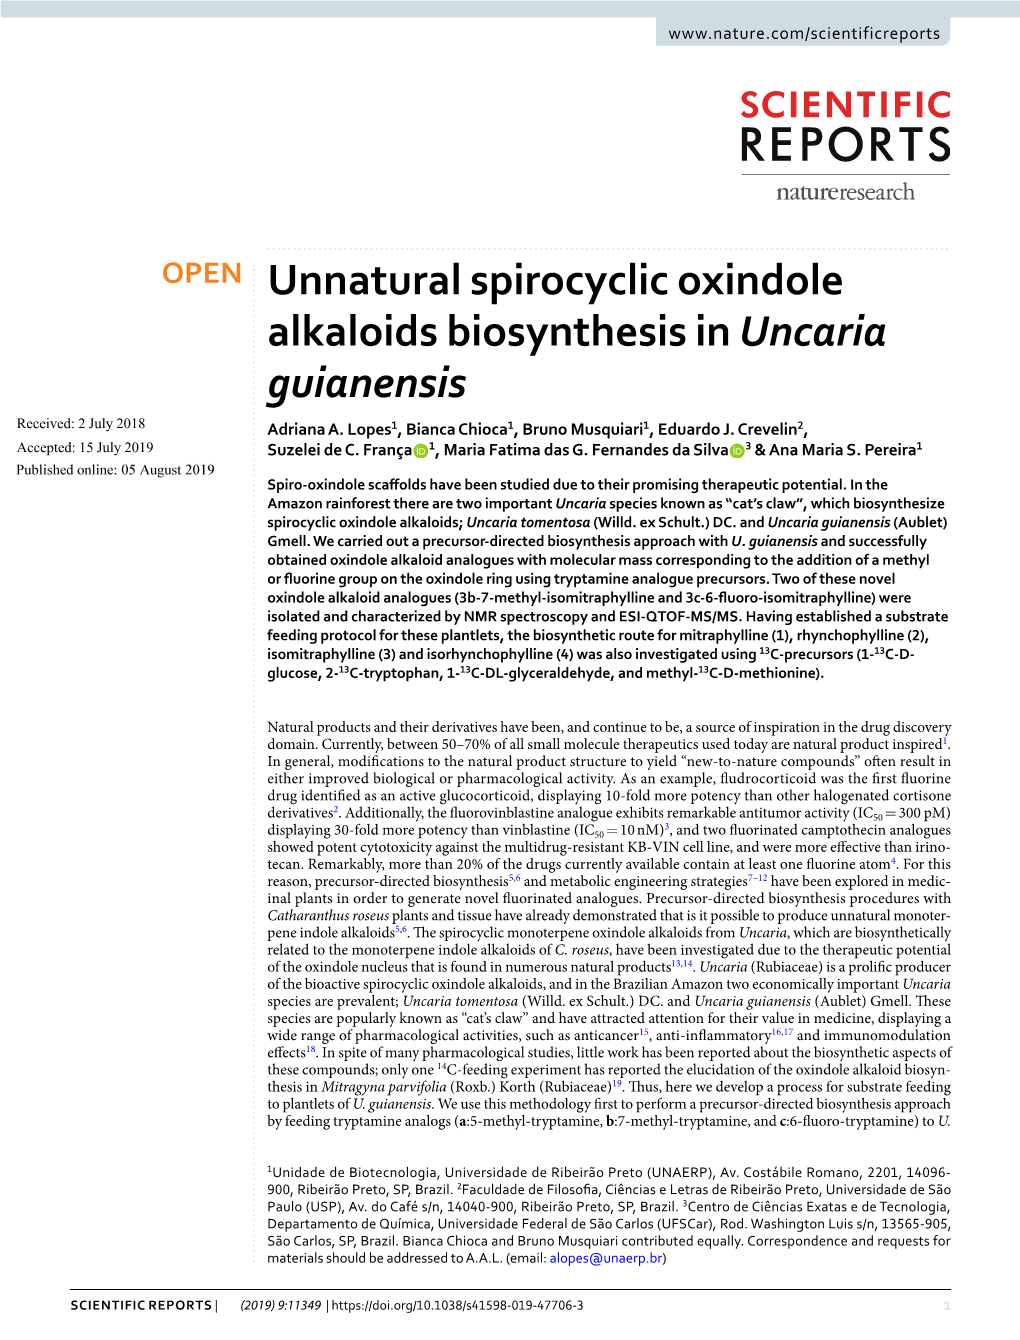 Unnatural Spirocyclic Oxindole Alkaloids Biosynthesis in Uncaria Guianensis Received: 2 July 2018 Adriana A